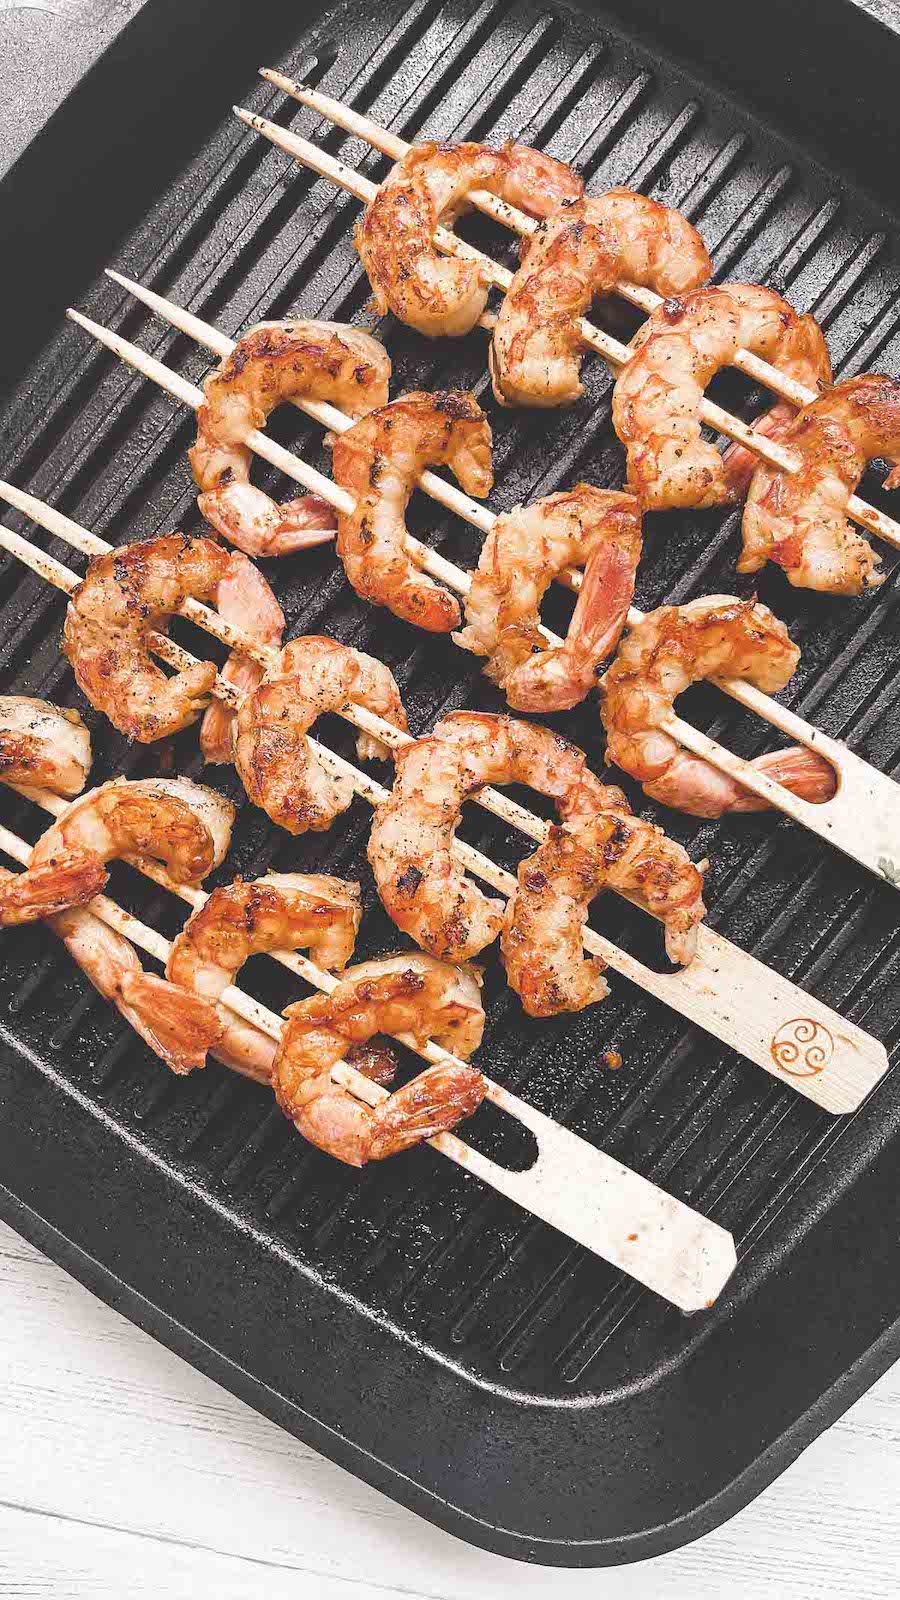 Shrimp of wooden skewers grilling on a black grill pan.